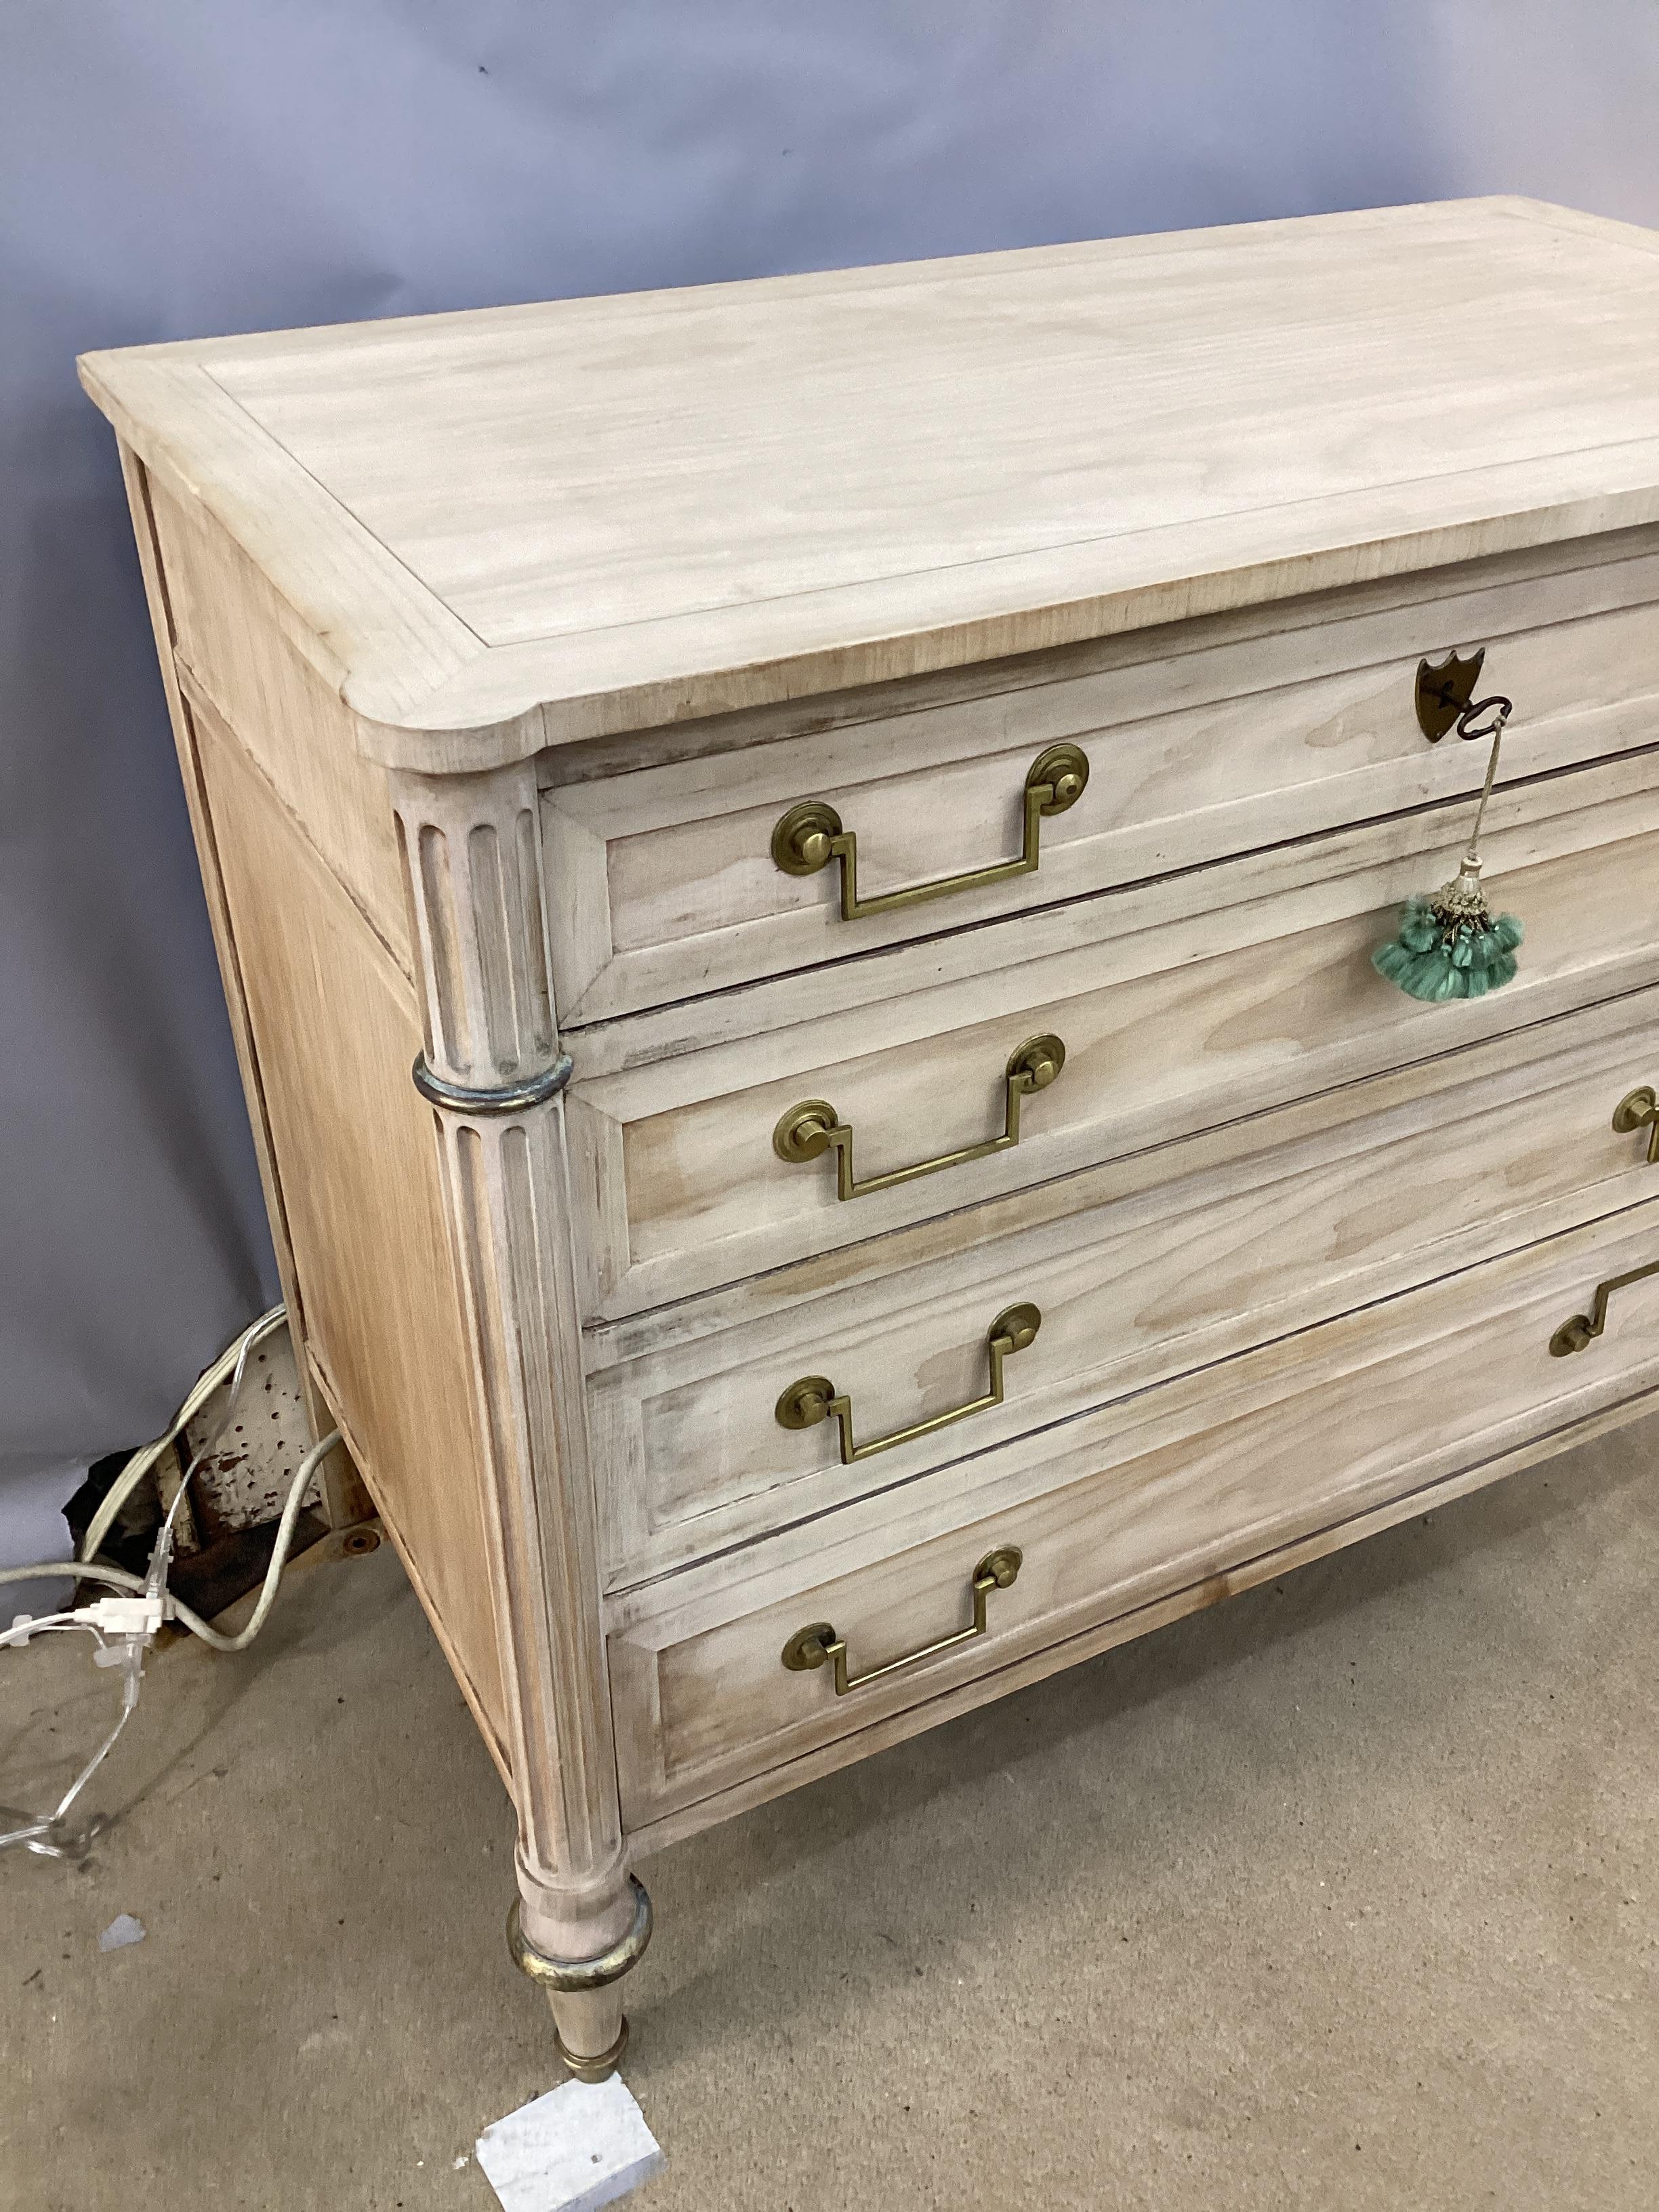 Louis XVI Style Bleached Chest by Baker Furniture Company. Brass mounted with side fluted columns. Top drawer has the original Baker Furniture Company plaque.. Retains the original key.